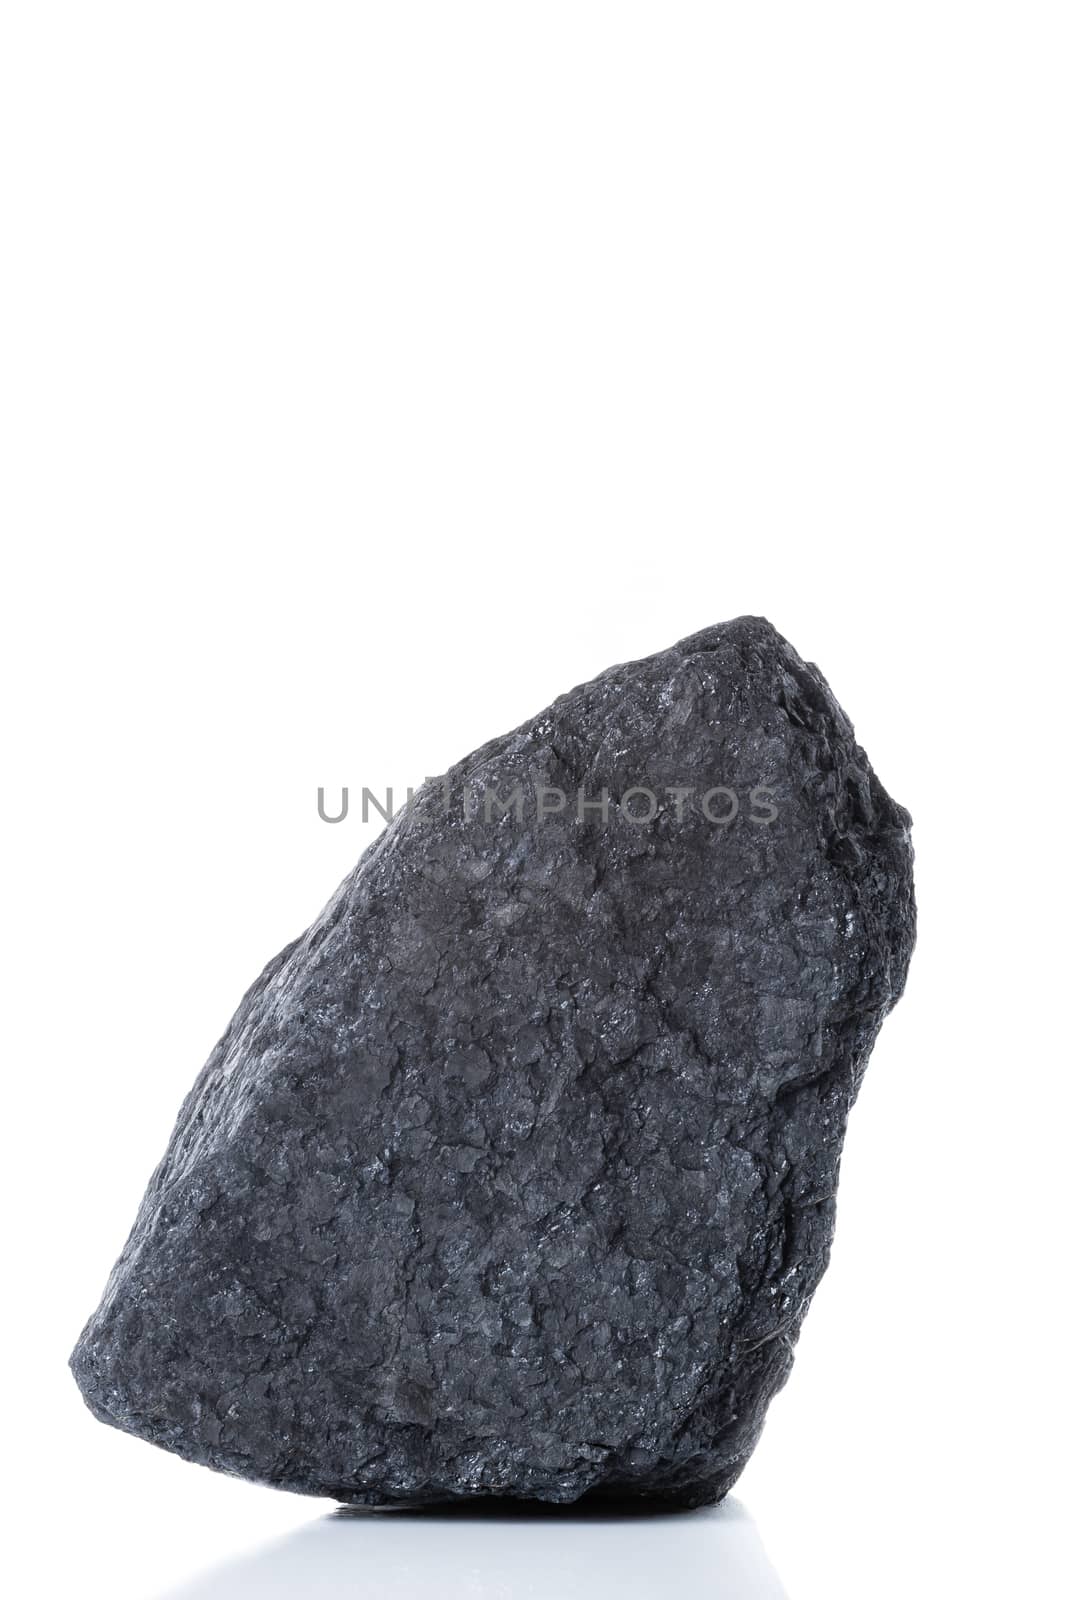  large piece of black bituminous coal on a white background by claraveritas